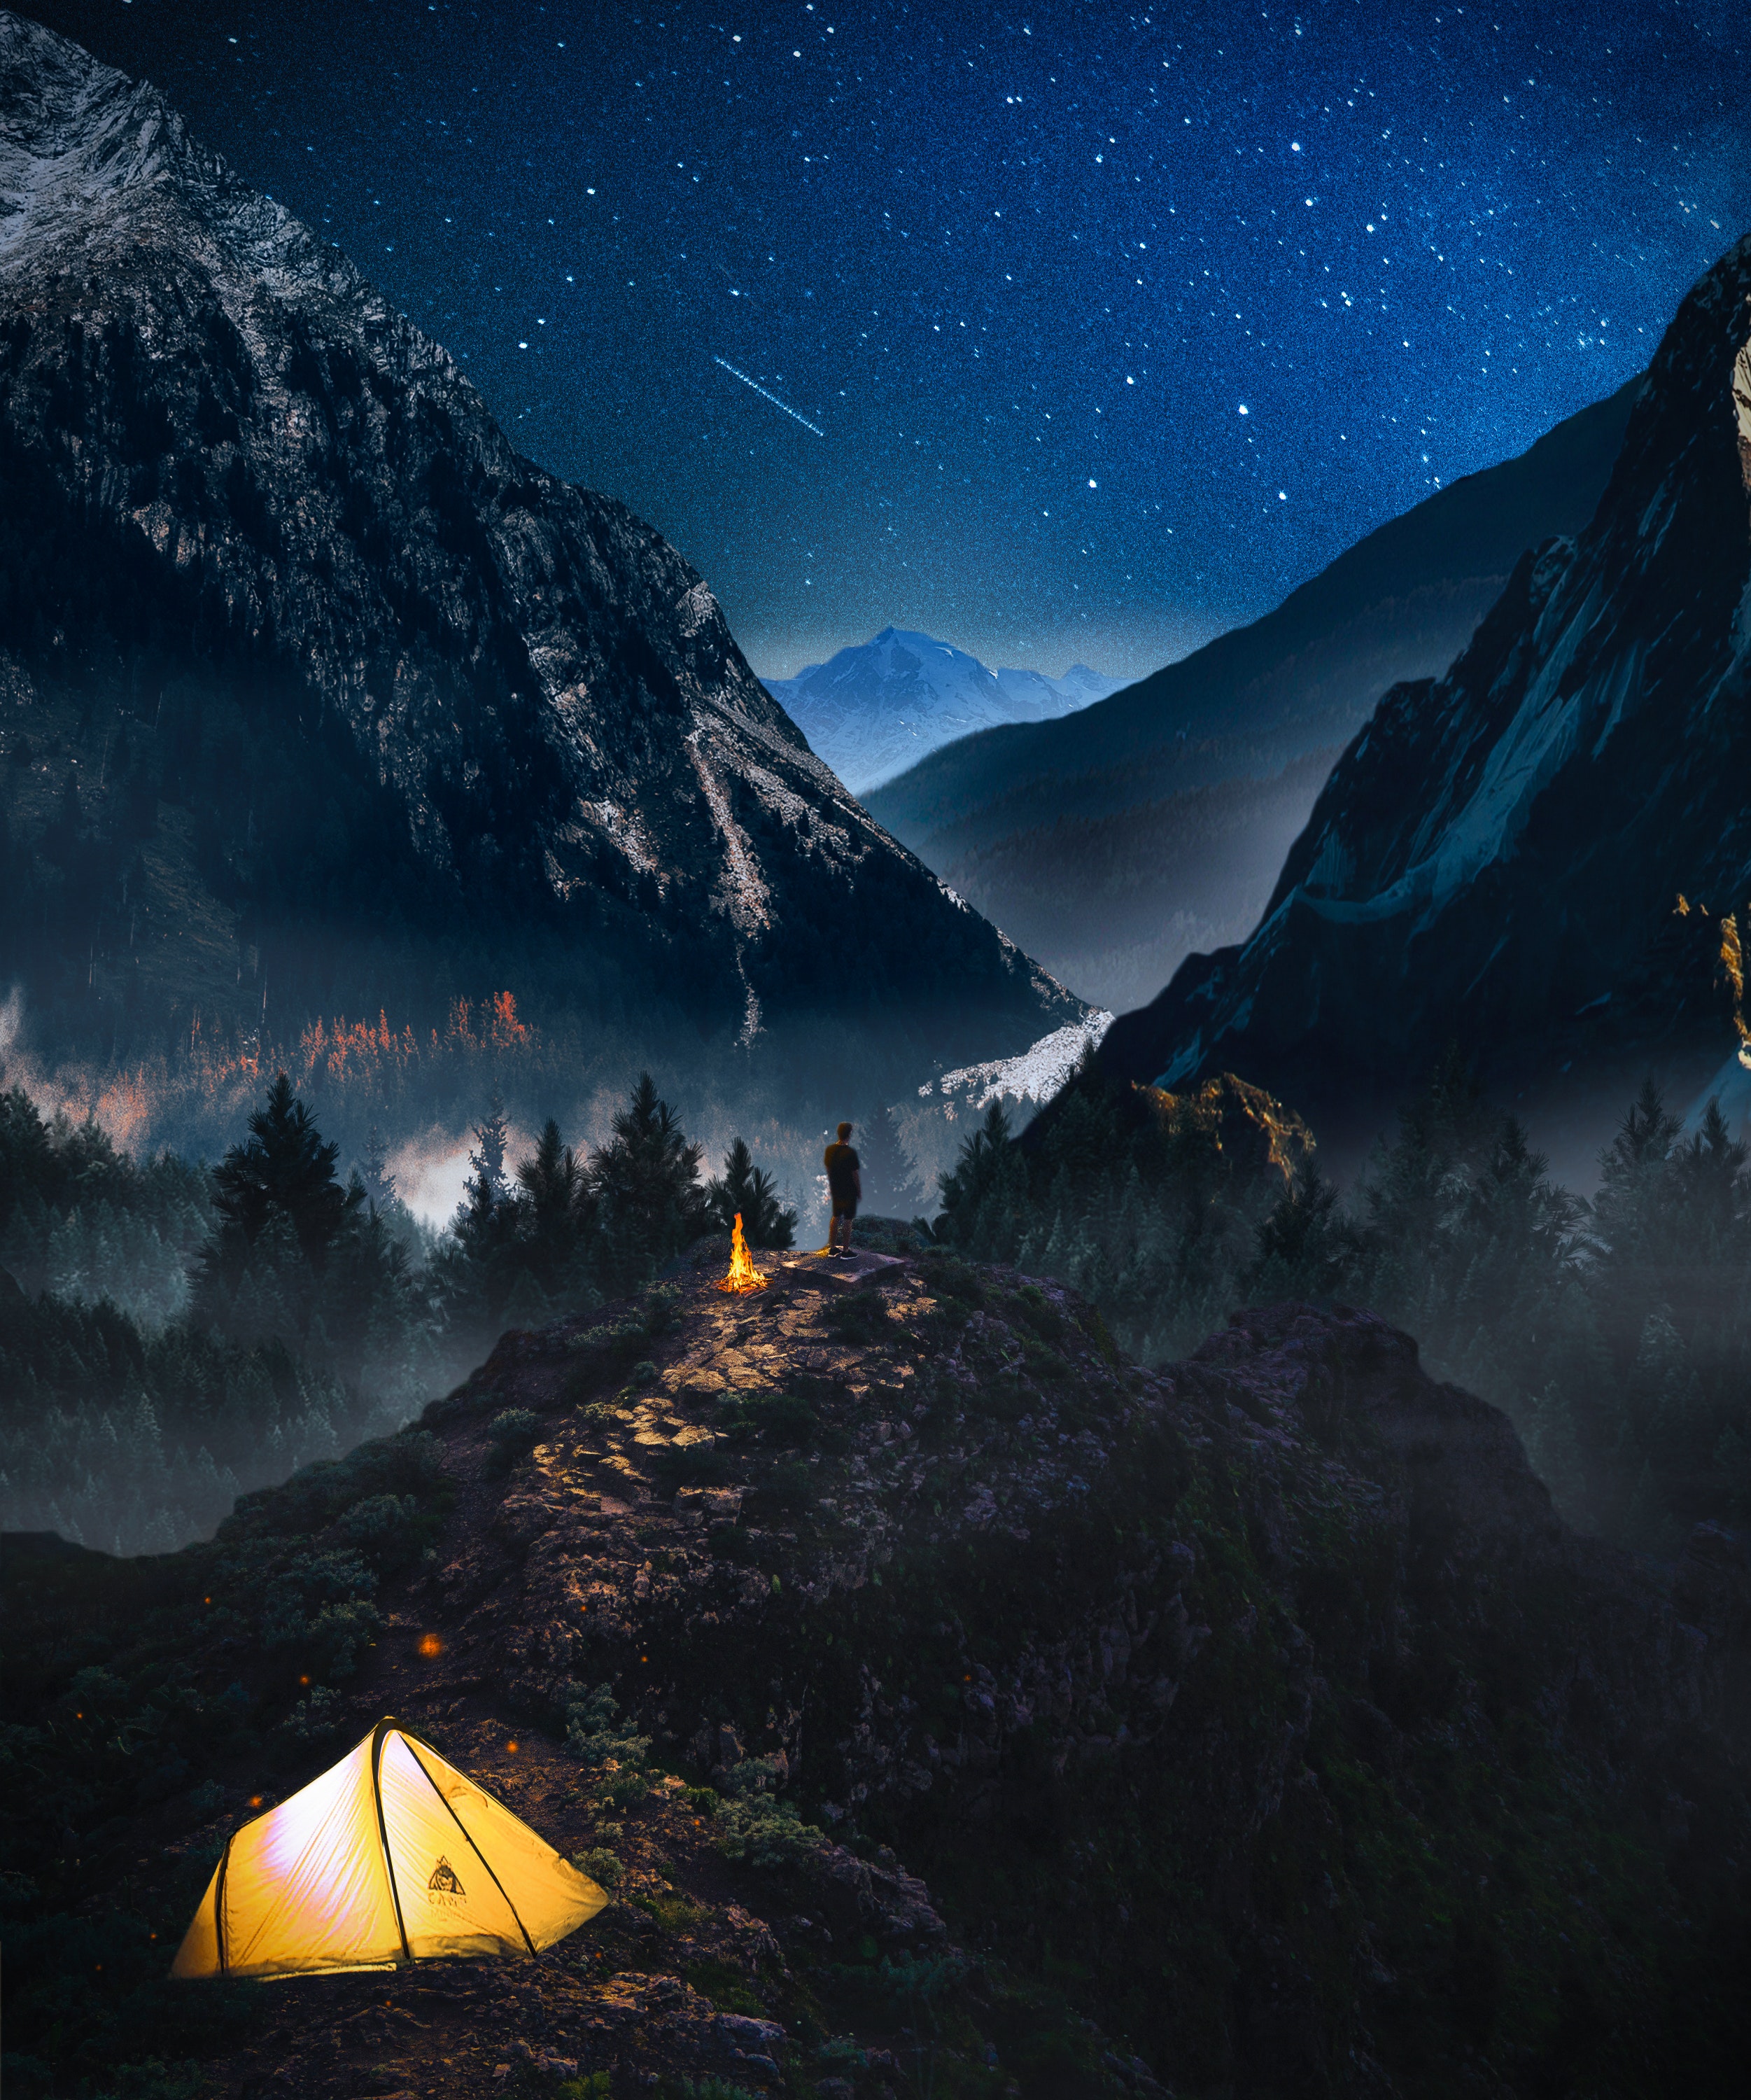 photoshop, starry sky, camping, campsite, loneliness, mountains, nature phone background